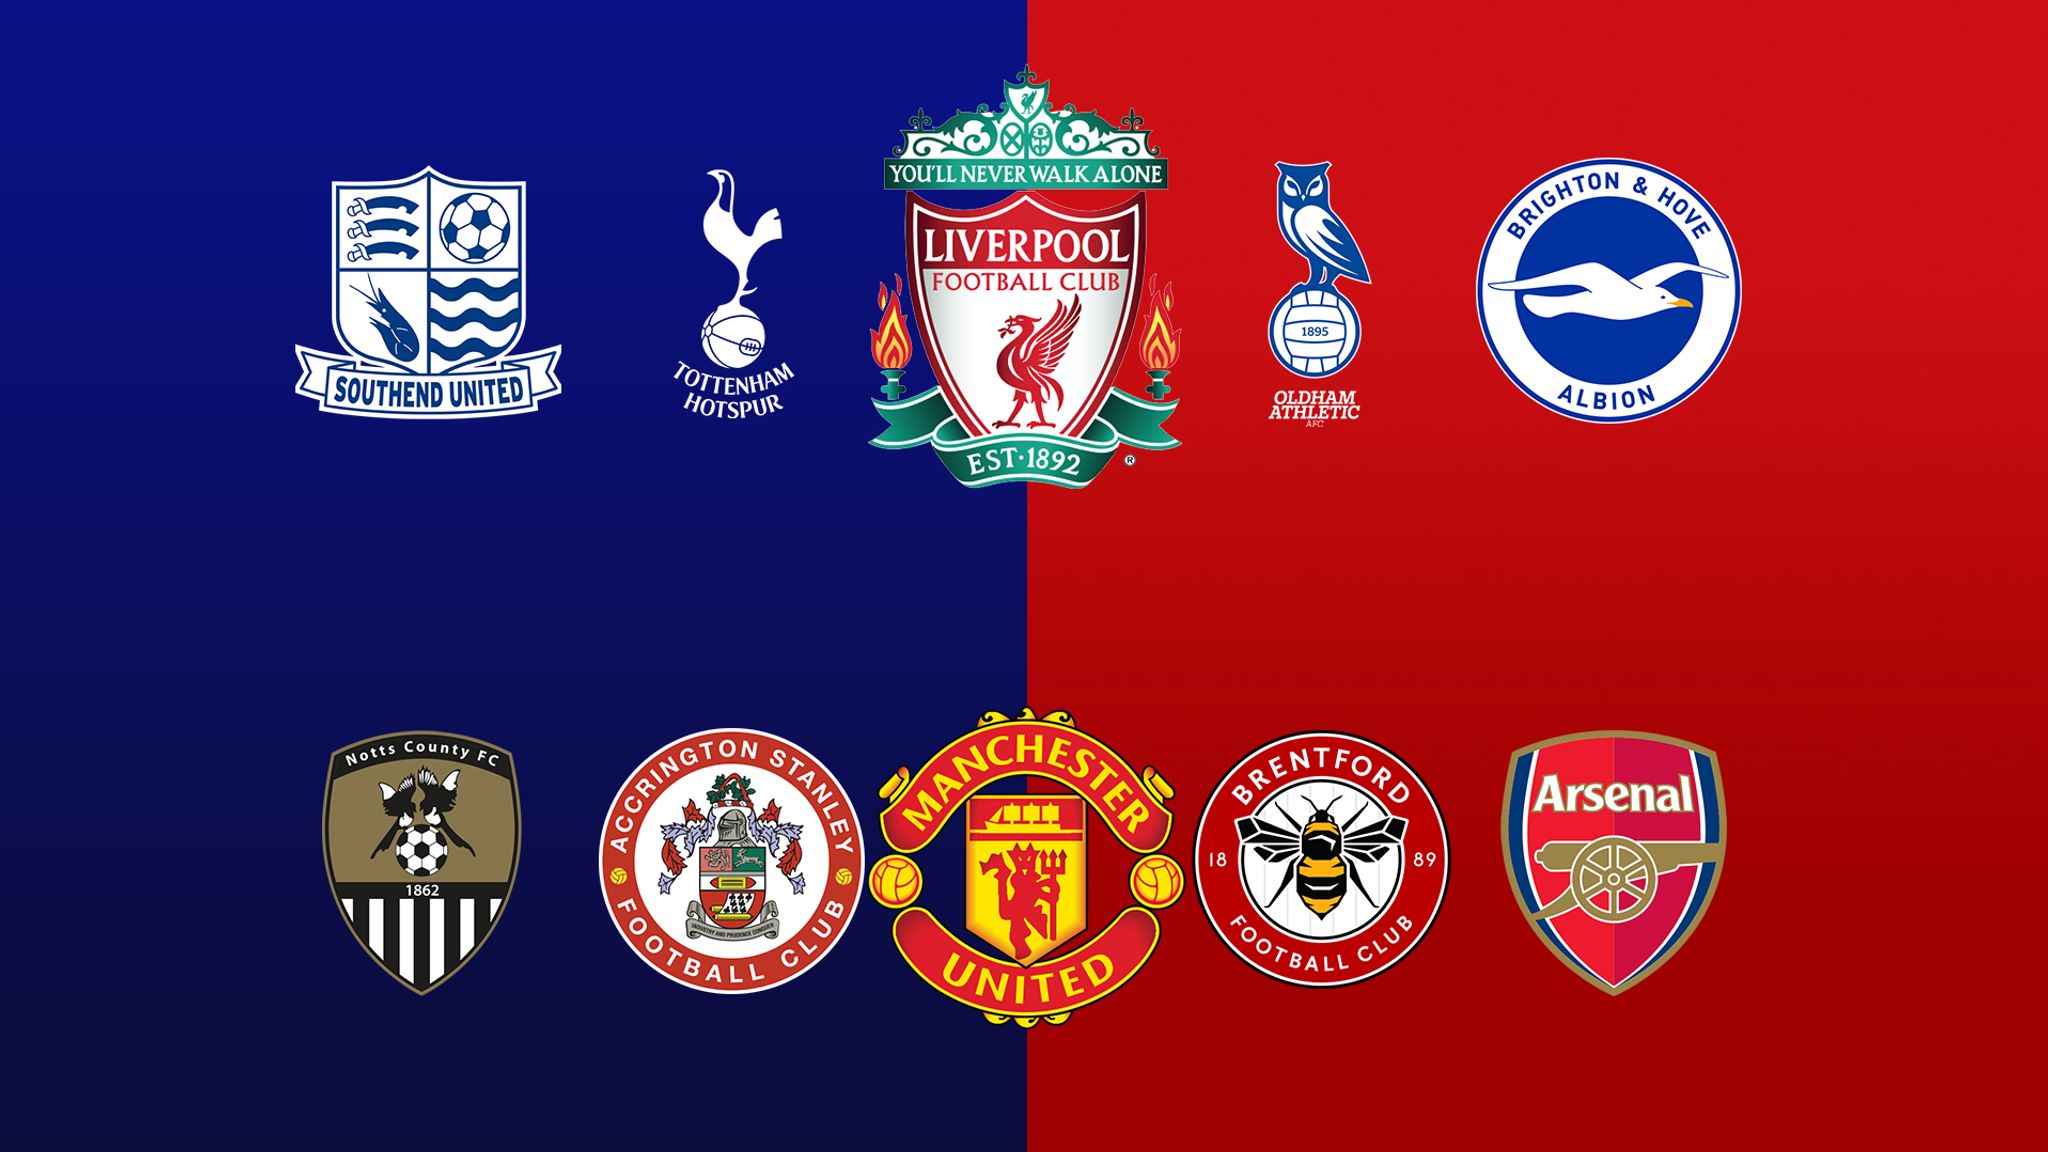 Who are the big top flight winners on Boxing Day in English football?